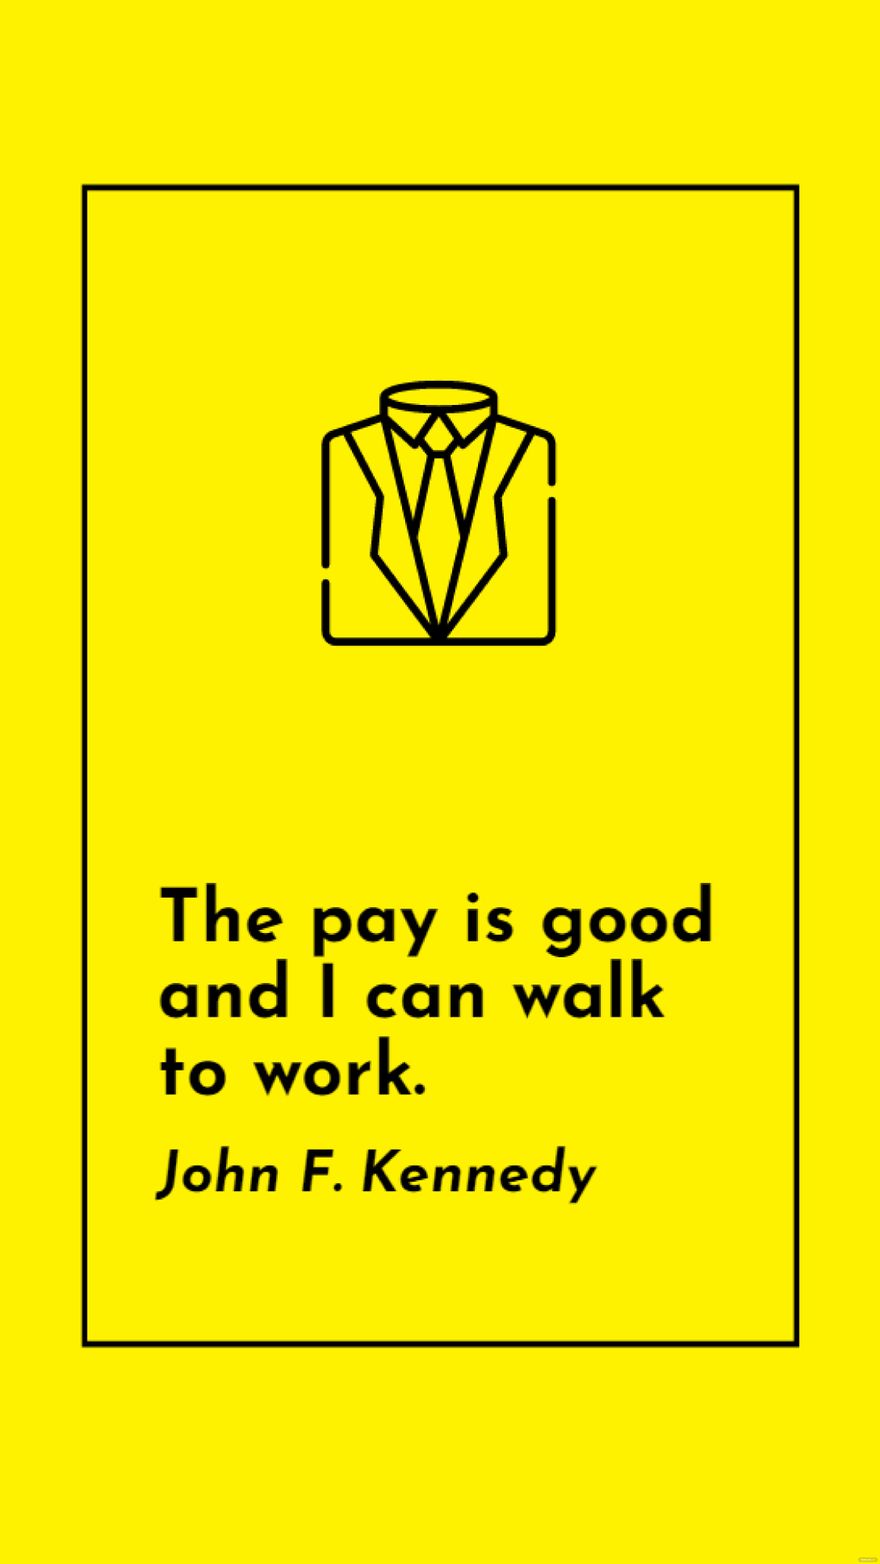 Free John F. Kennedy - The pay is good and I can walk to work. in JPG